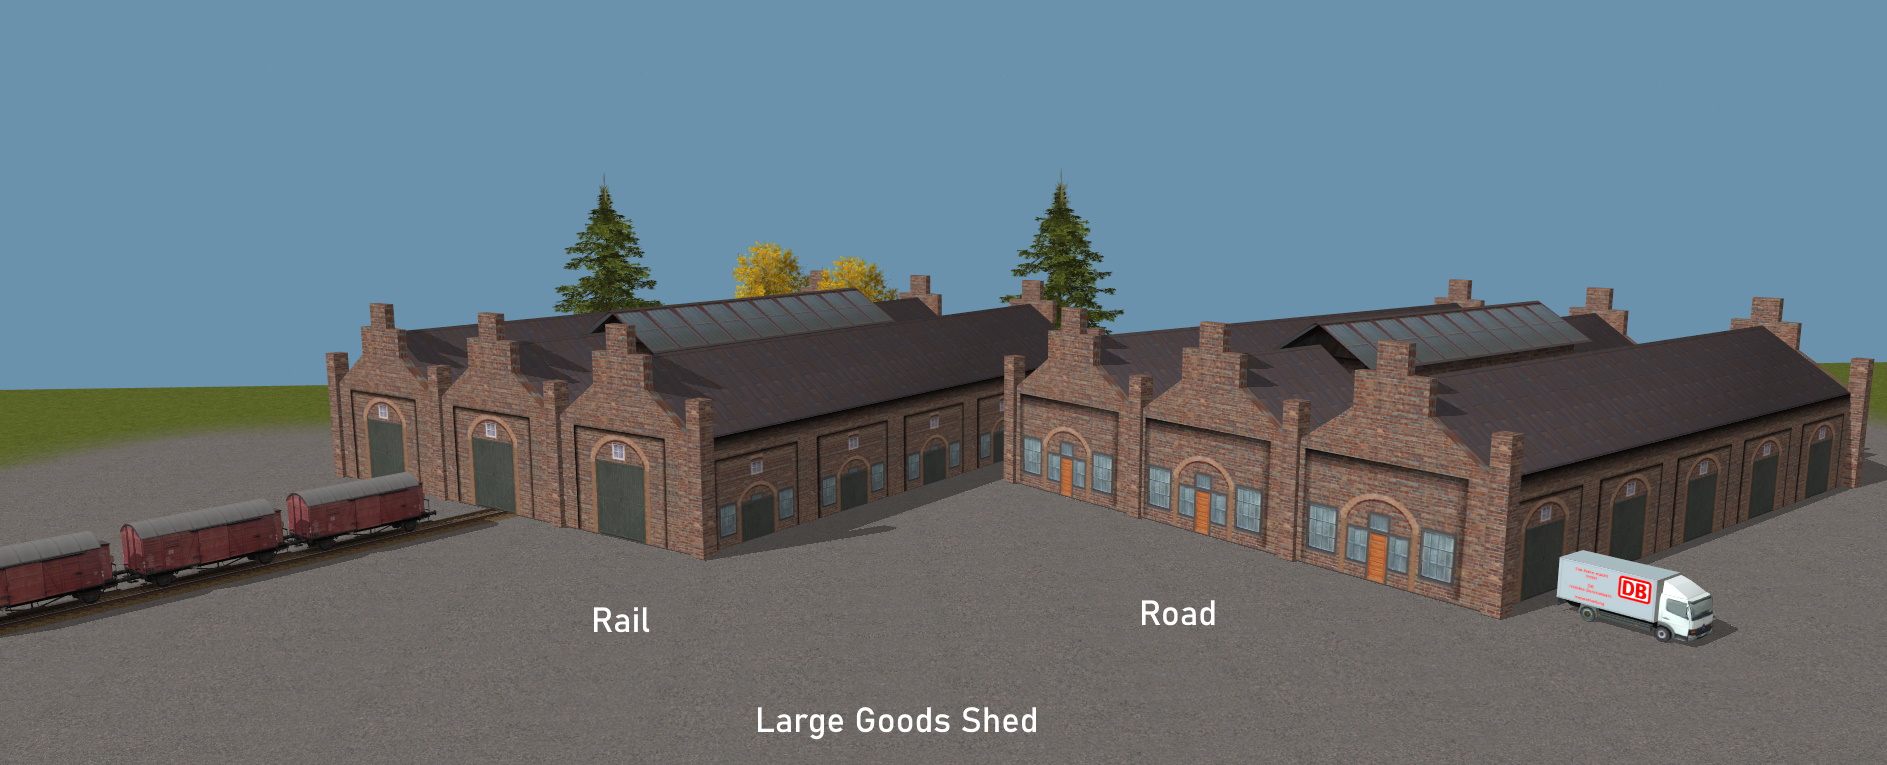 Large Goods Shed Rail + Road - Gueterschuppen